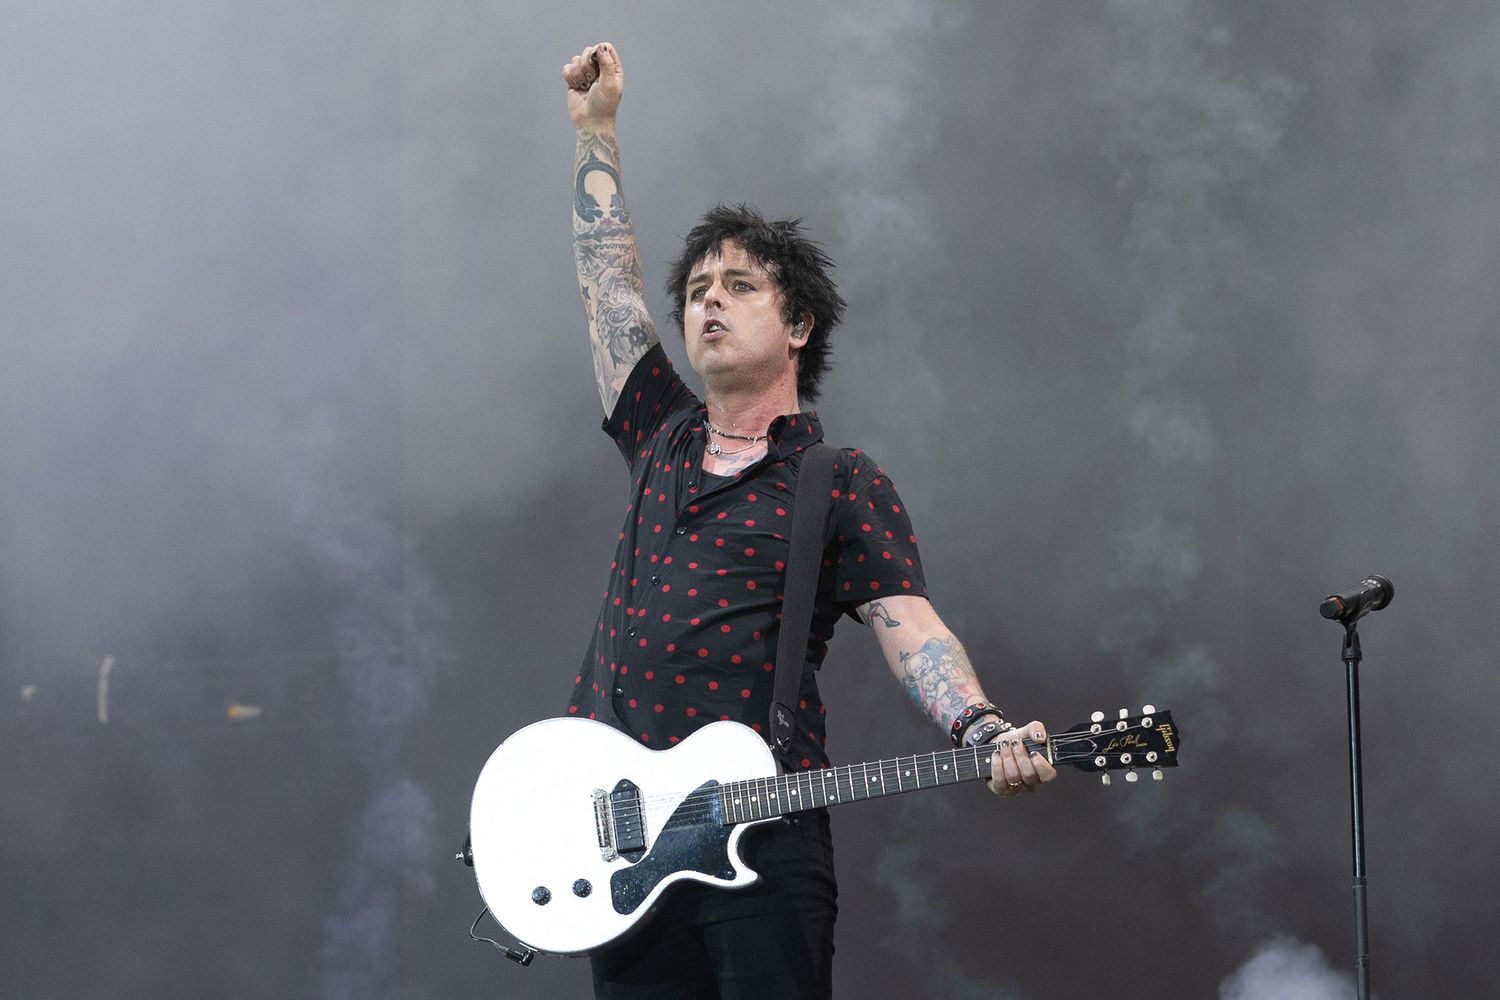 Billie Joe Armstrong of Green Day performs during Hella Mega tour at London Stadium on June 24, 2022 in London, England